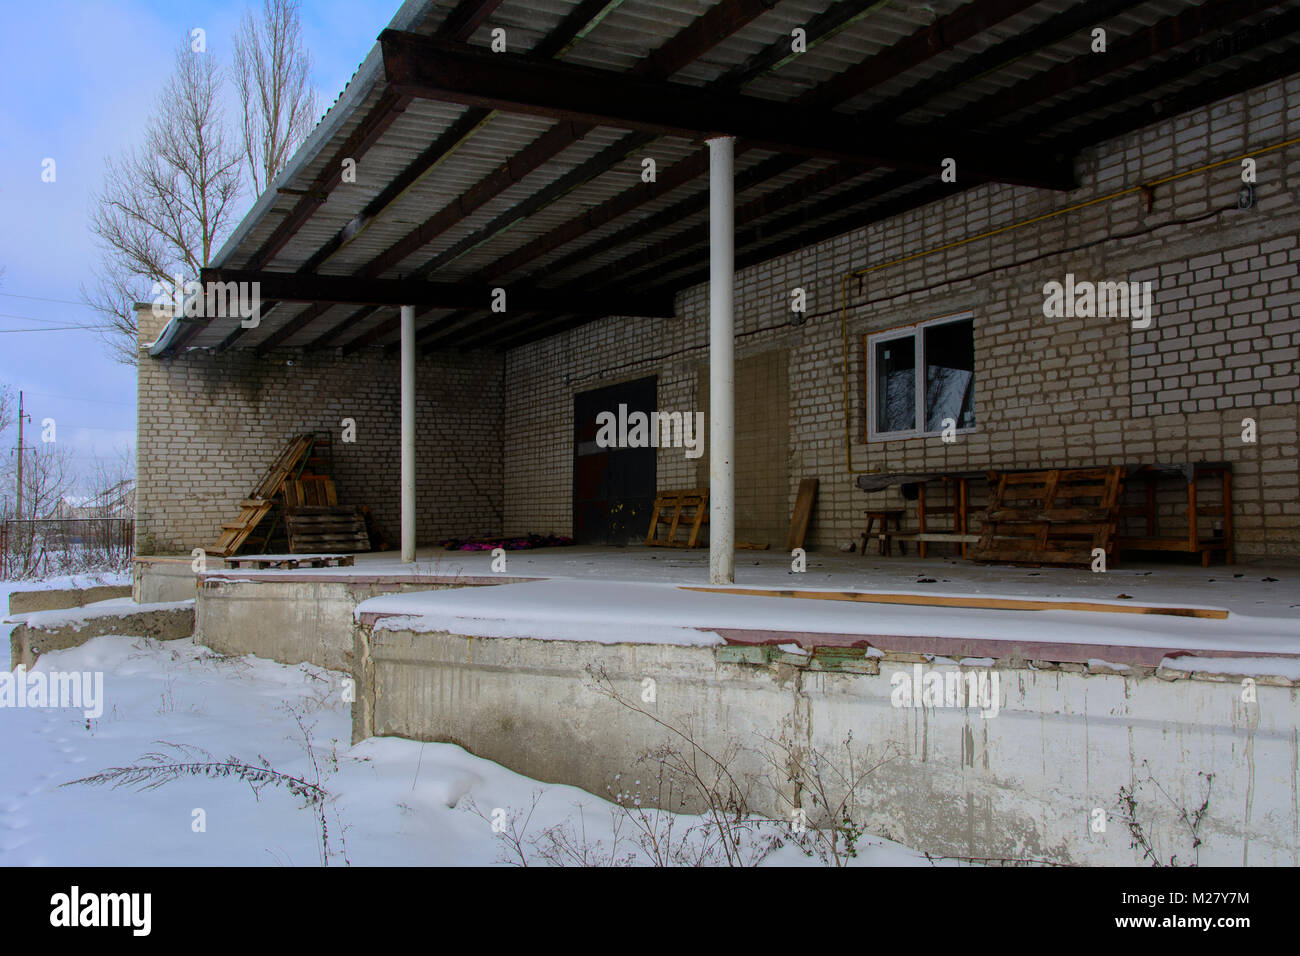 A platform for loading and unloading materials of the destroyed and abandoned bakery building against the background of winter trees and a blue cold w Stock Photo